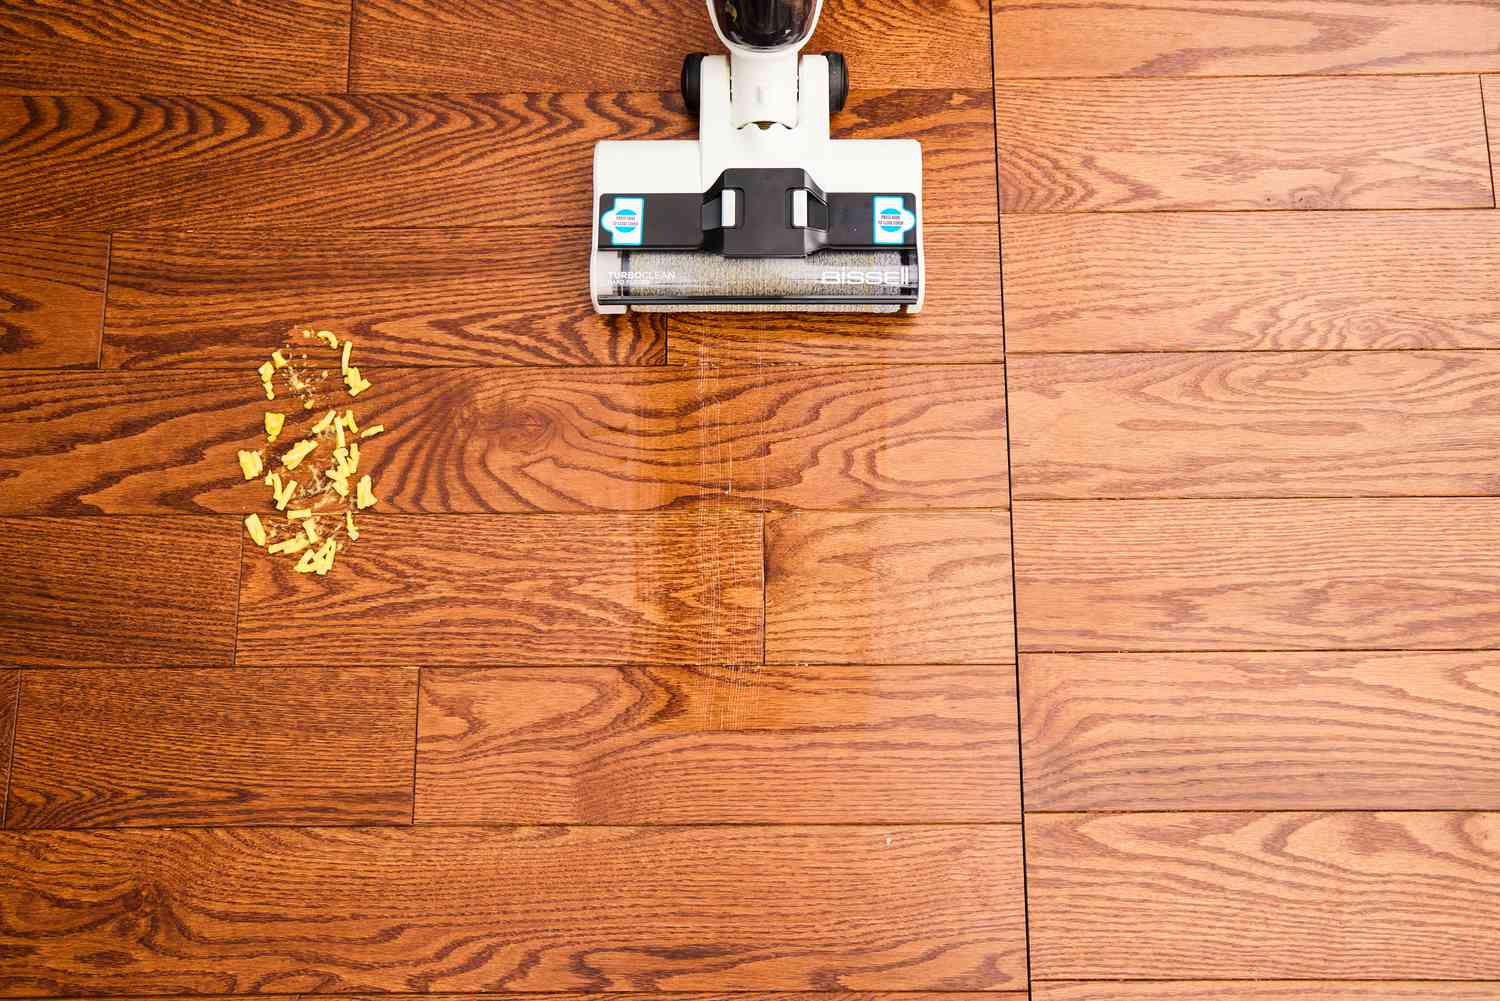 The Bissell TurboClean Cordless Hard Floor Cleaner is used to clean a hardwood floor